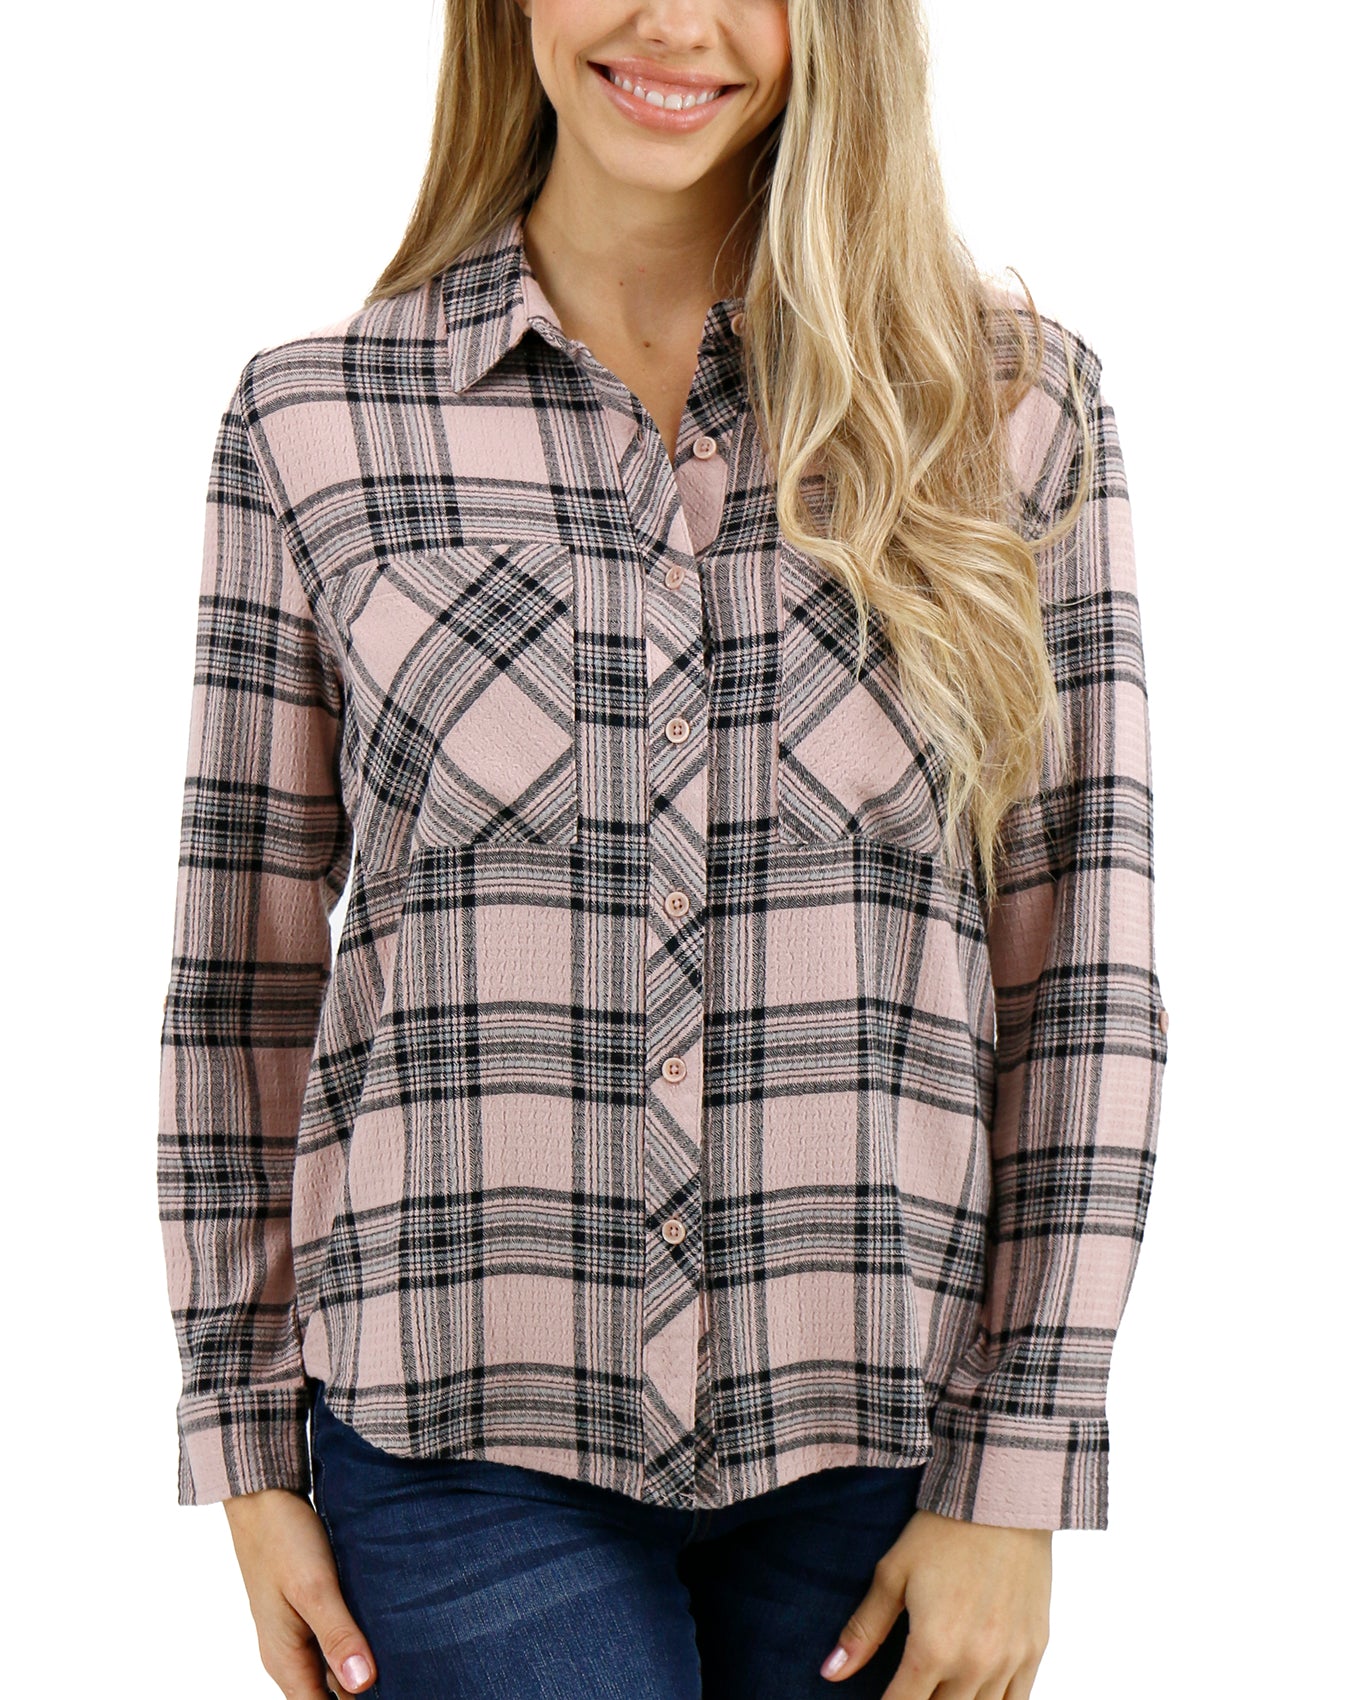 Front stock shot of Blush/Black Plaid Favorite Button Up Top